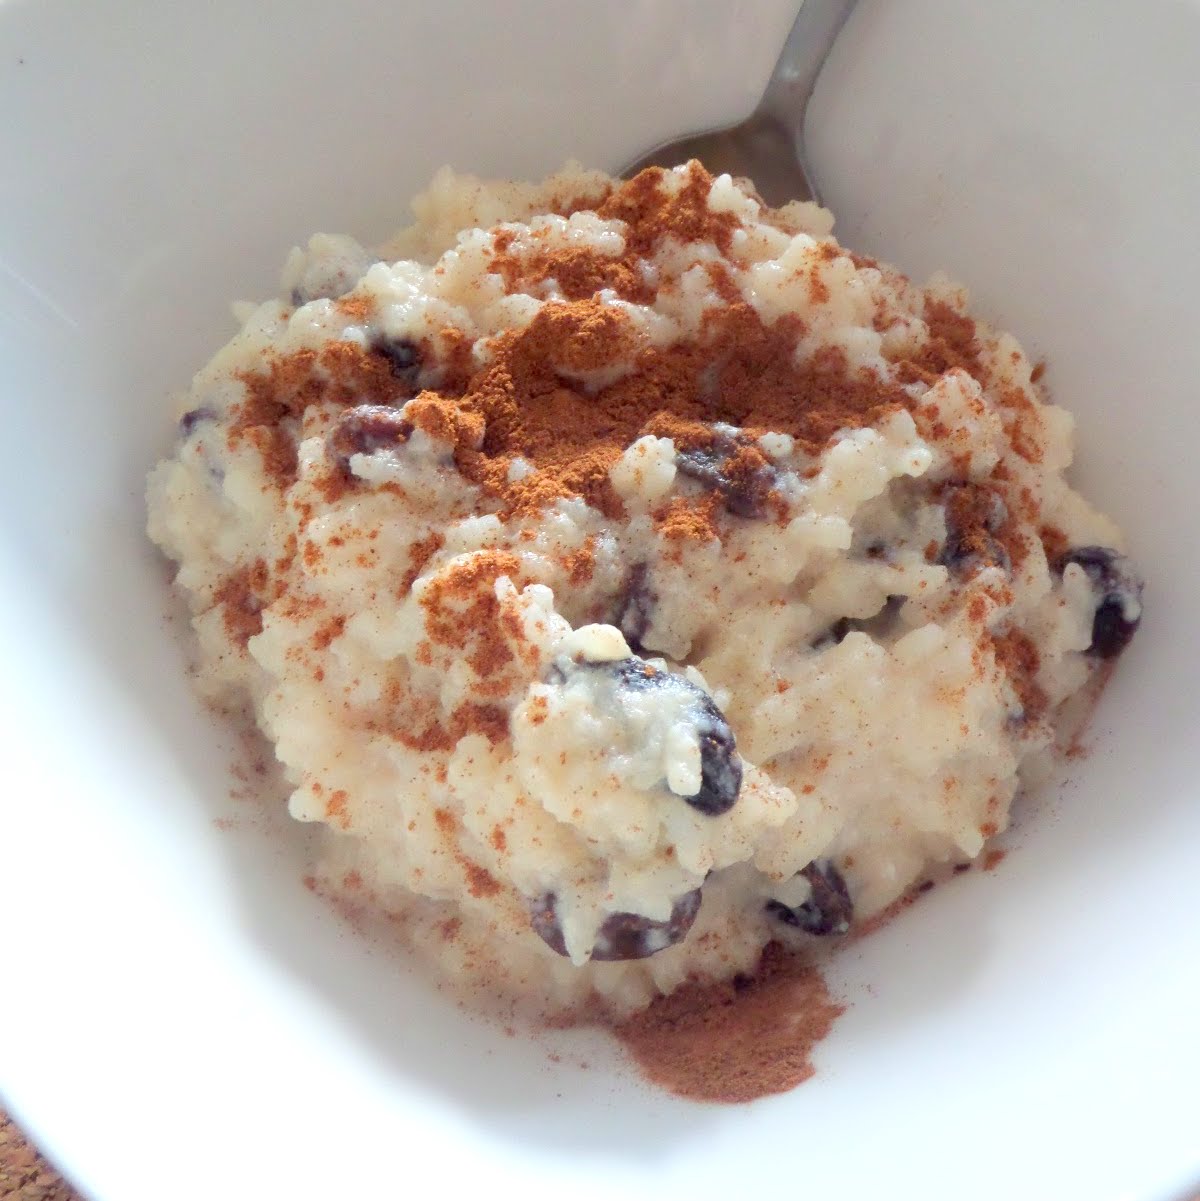 Leftover Rice Pudding:  A creamy pudding made with leftover rice, milk, sugar, and raisins.